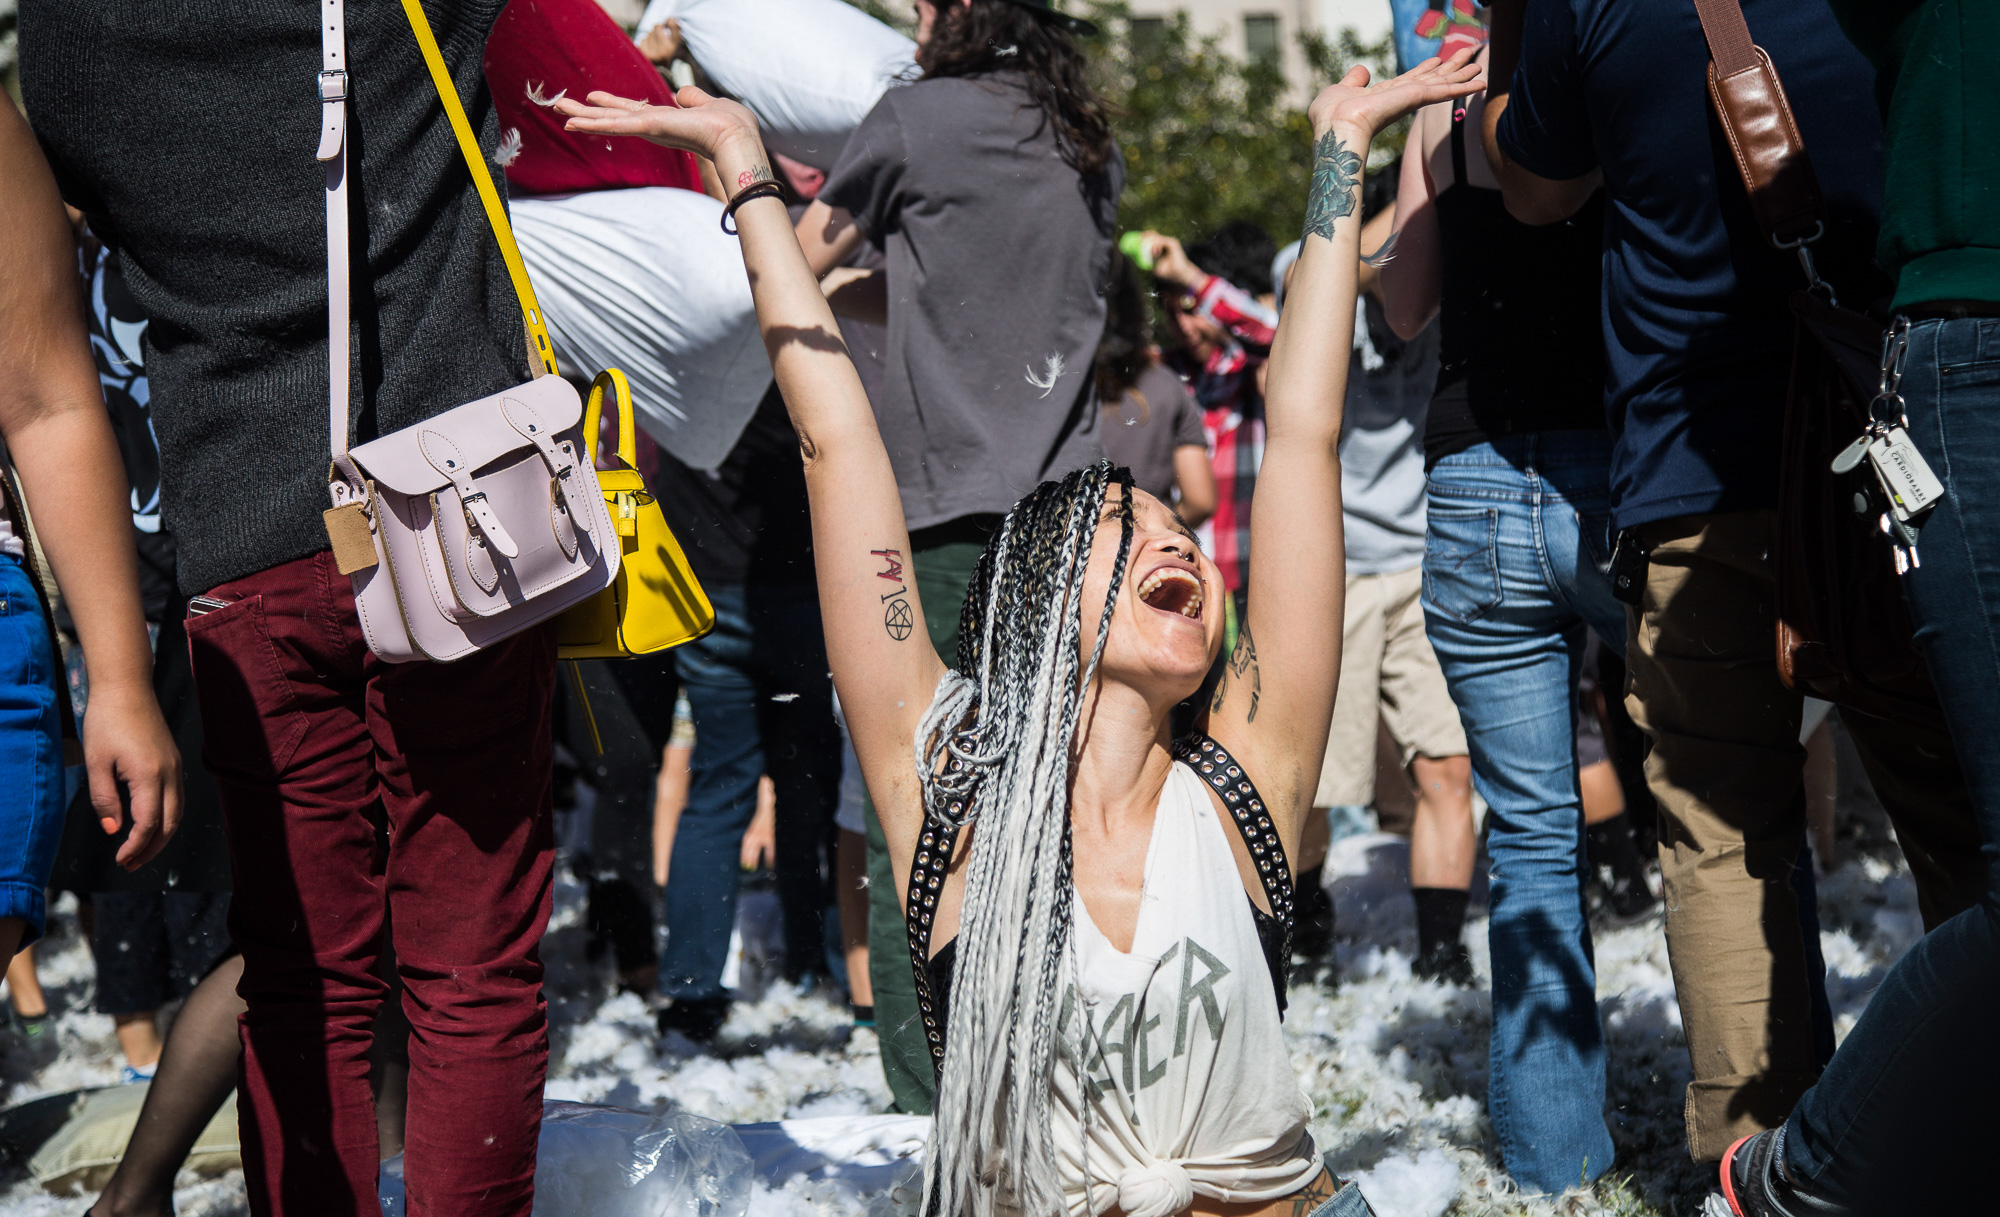  Megan Robyn cheers with joy and takes part in a giant pillow fight as feathers fly in Pershing Square in Downtown Los Angles on Saturday, April 1 2017. Hundreds of people traded soft blows in a giant pillow fight that dwarfed even the biggest slumbe